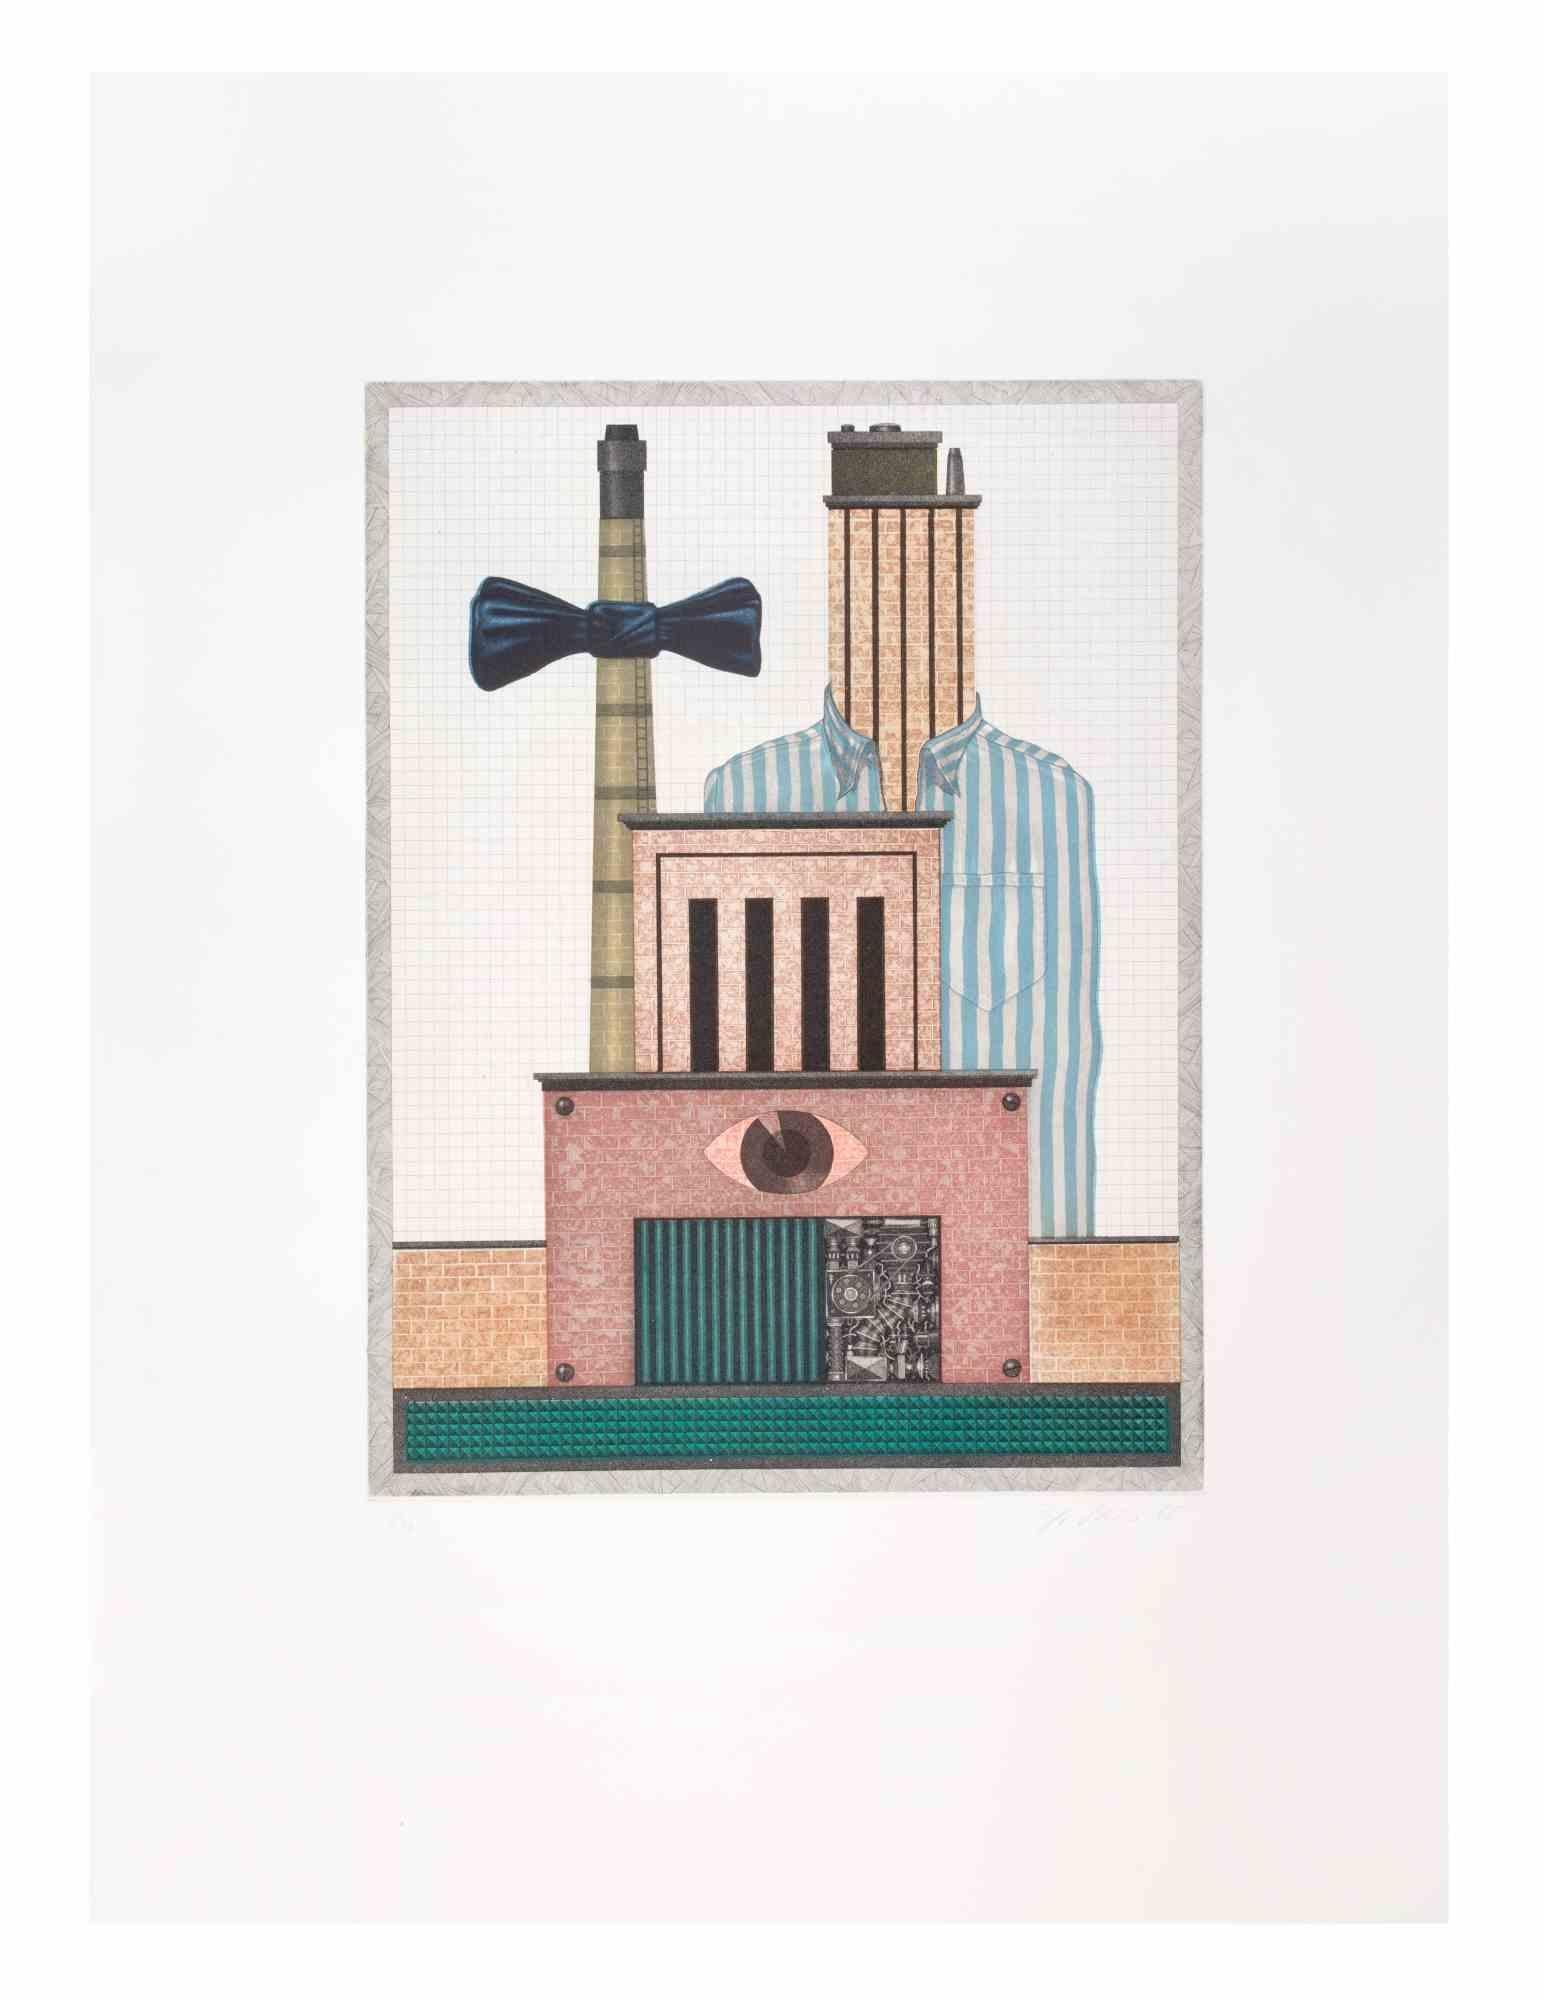 Brauerei is a contemporary artwork realized by the artist Fifo Stricker in 1985.

Mixed colored aquatint and etching.

Hand signed and dated by the artist on the lower right margin.

Numbered on the lower left marging. Edition of 5/50. 

Fifo